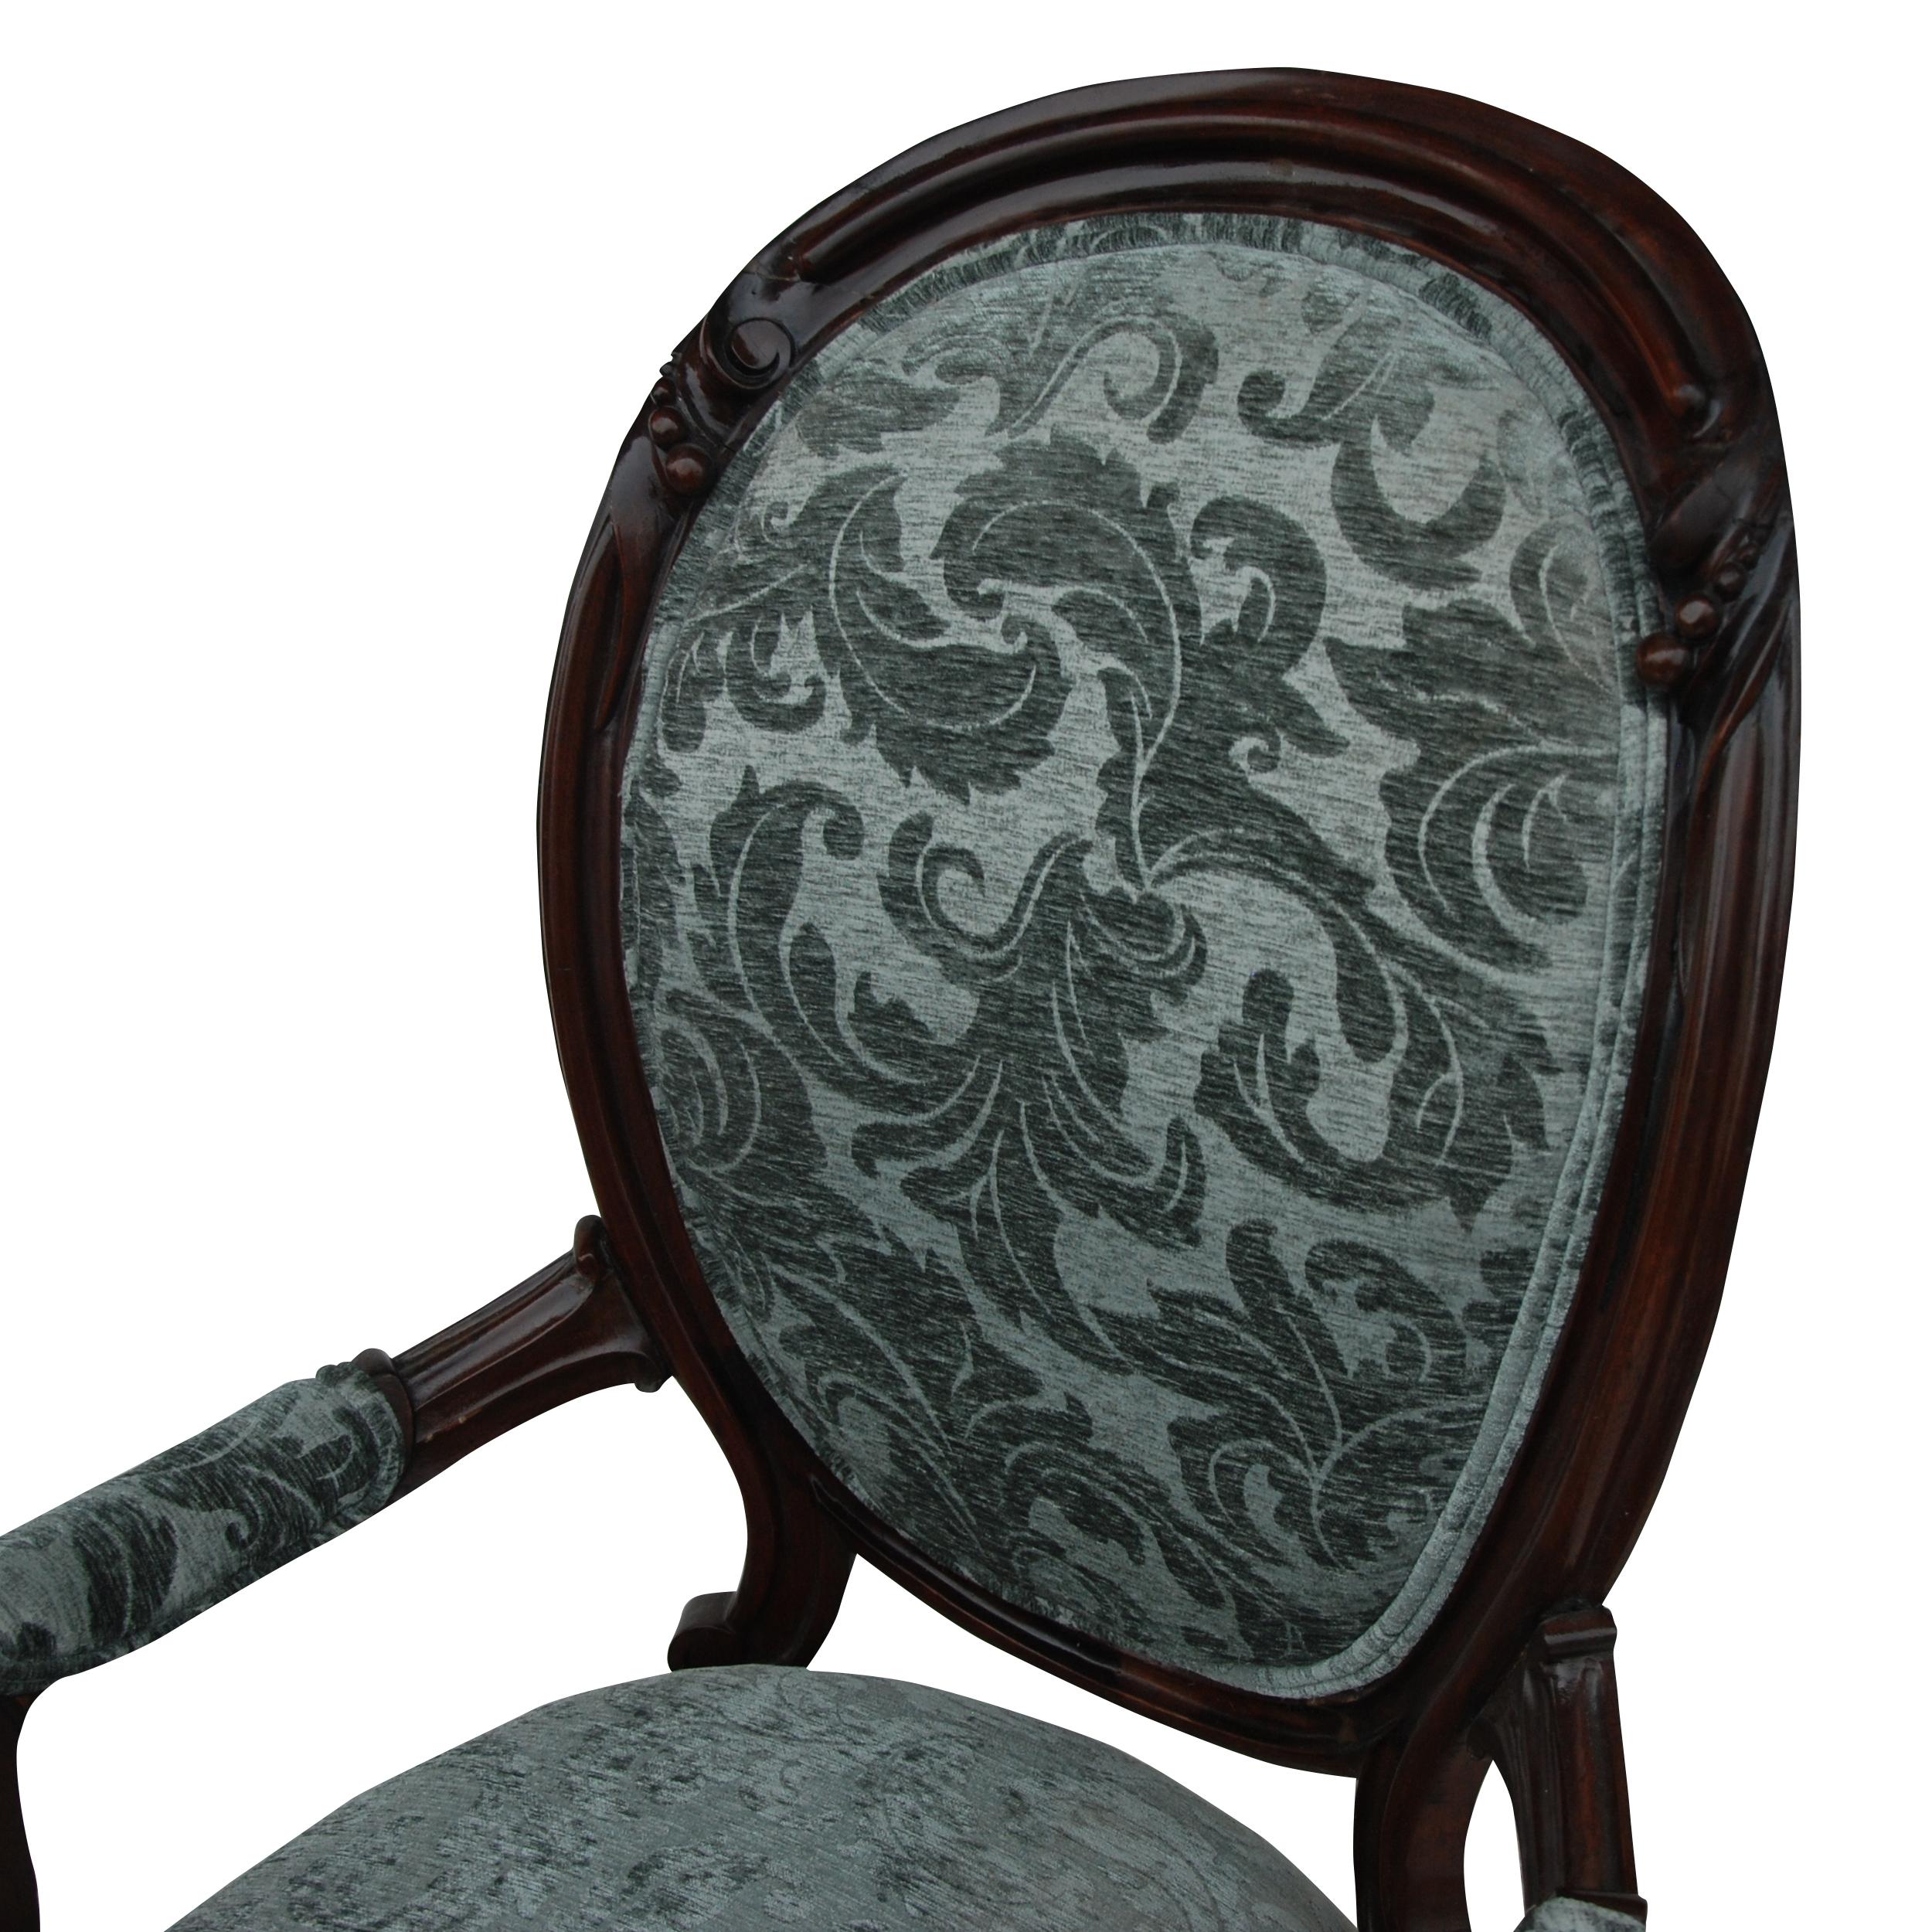 Vintage Victorian style spoon back lounge chair

Charming, decorative chair with a padded arched spoon back over upholstered seat in a flocked damask upholstery. Ebonized frames. Carved arms and claw front feet with sabre back legs.
 